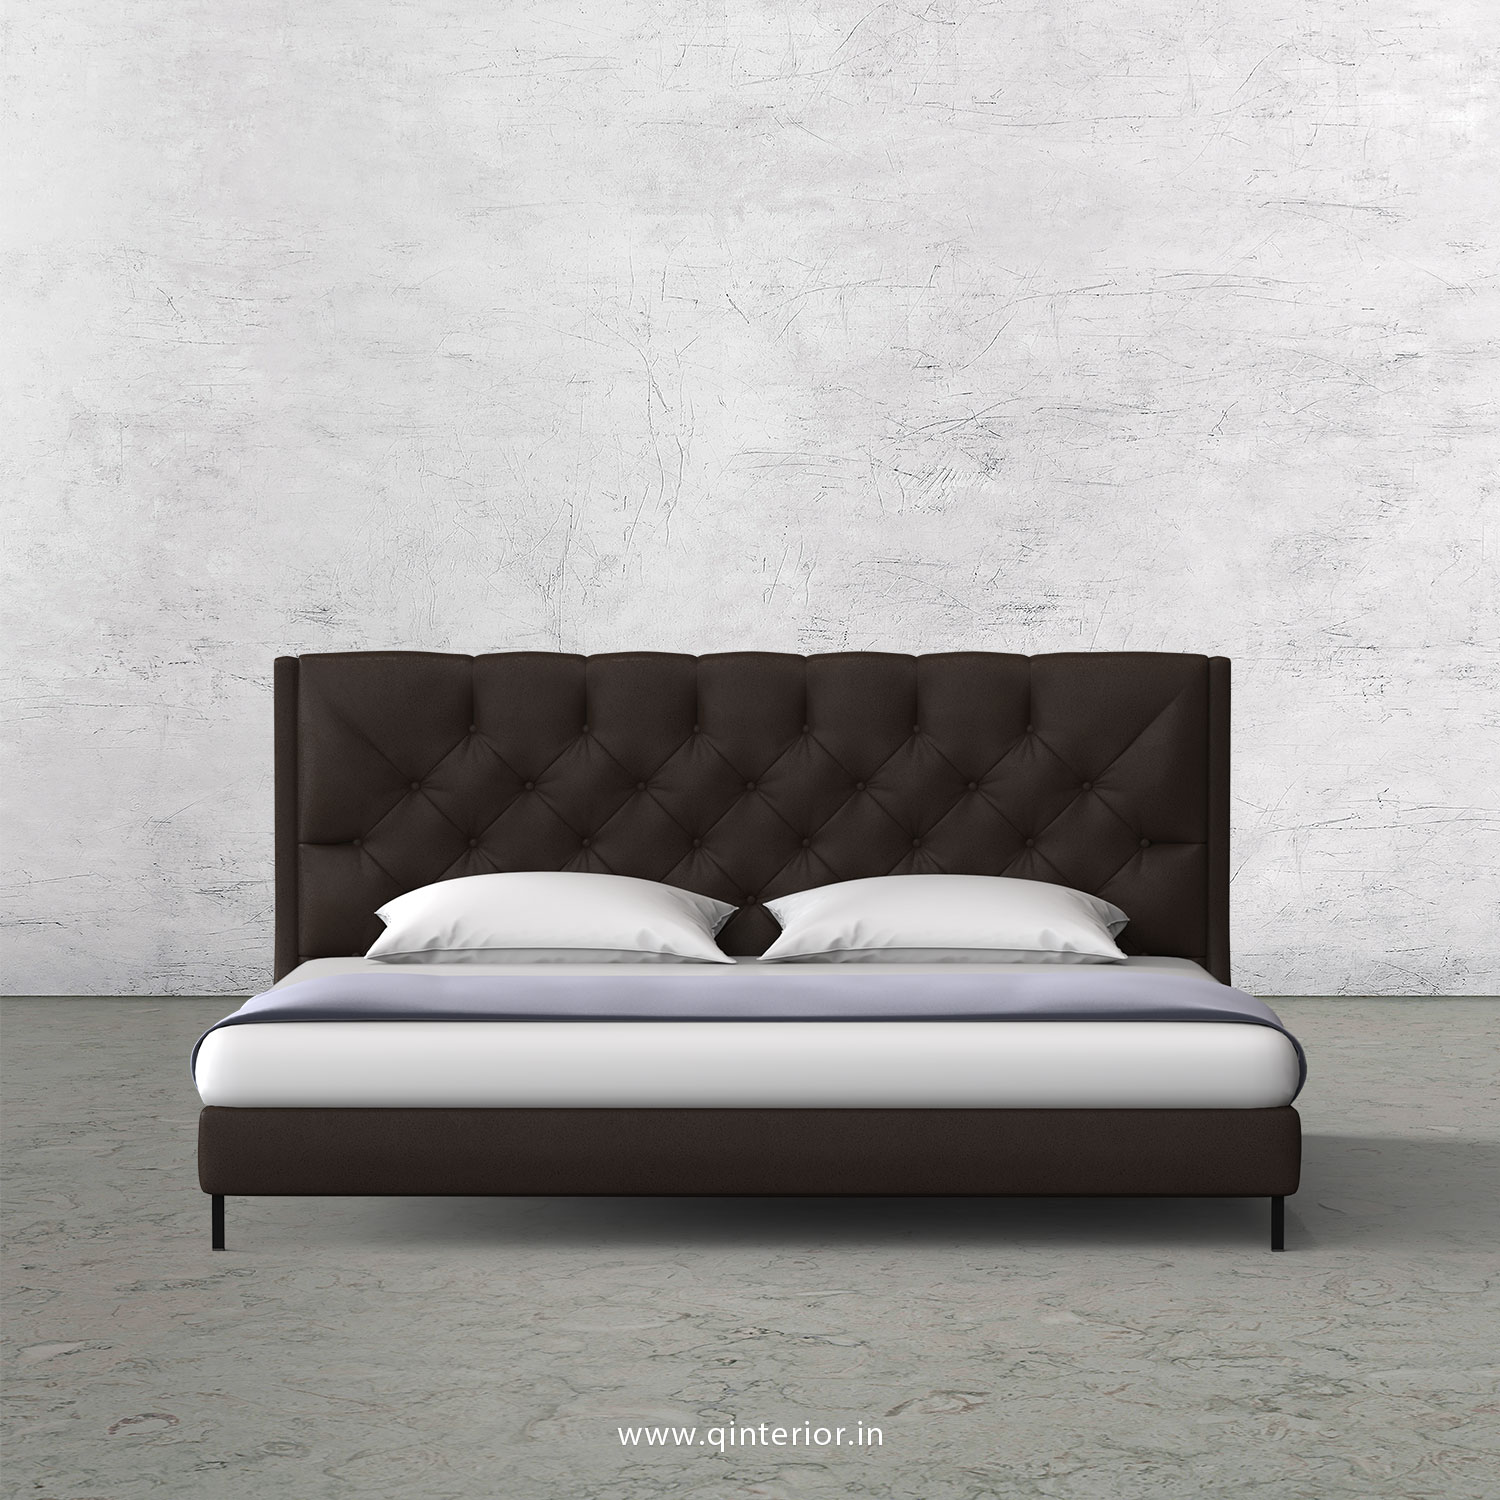 Scorpius King Size Bed in Fab Leather Fabric - KBD003 FL16